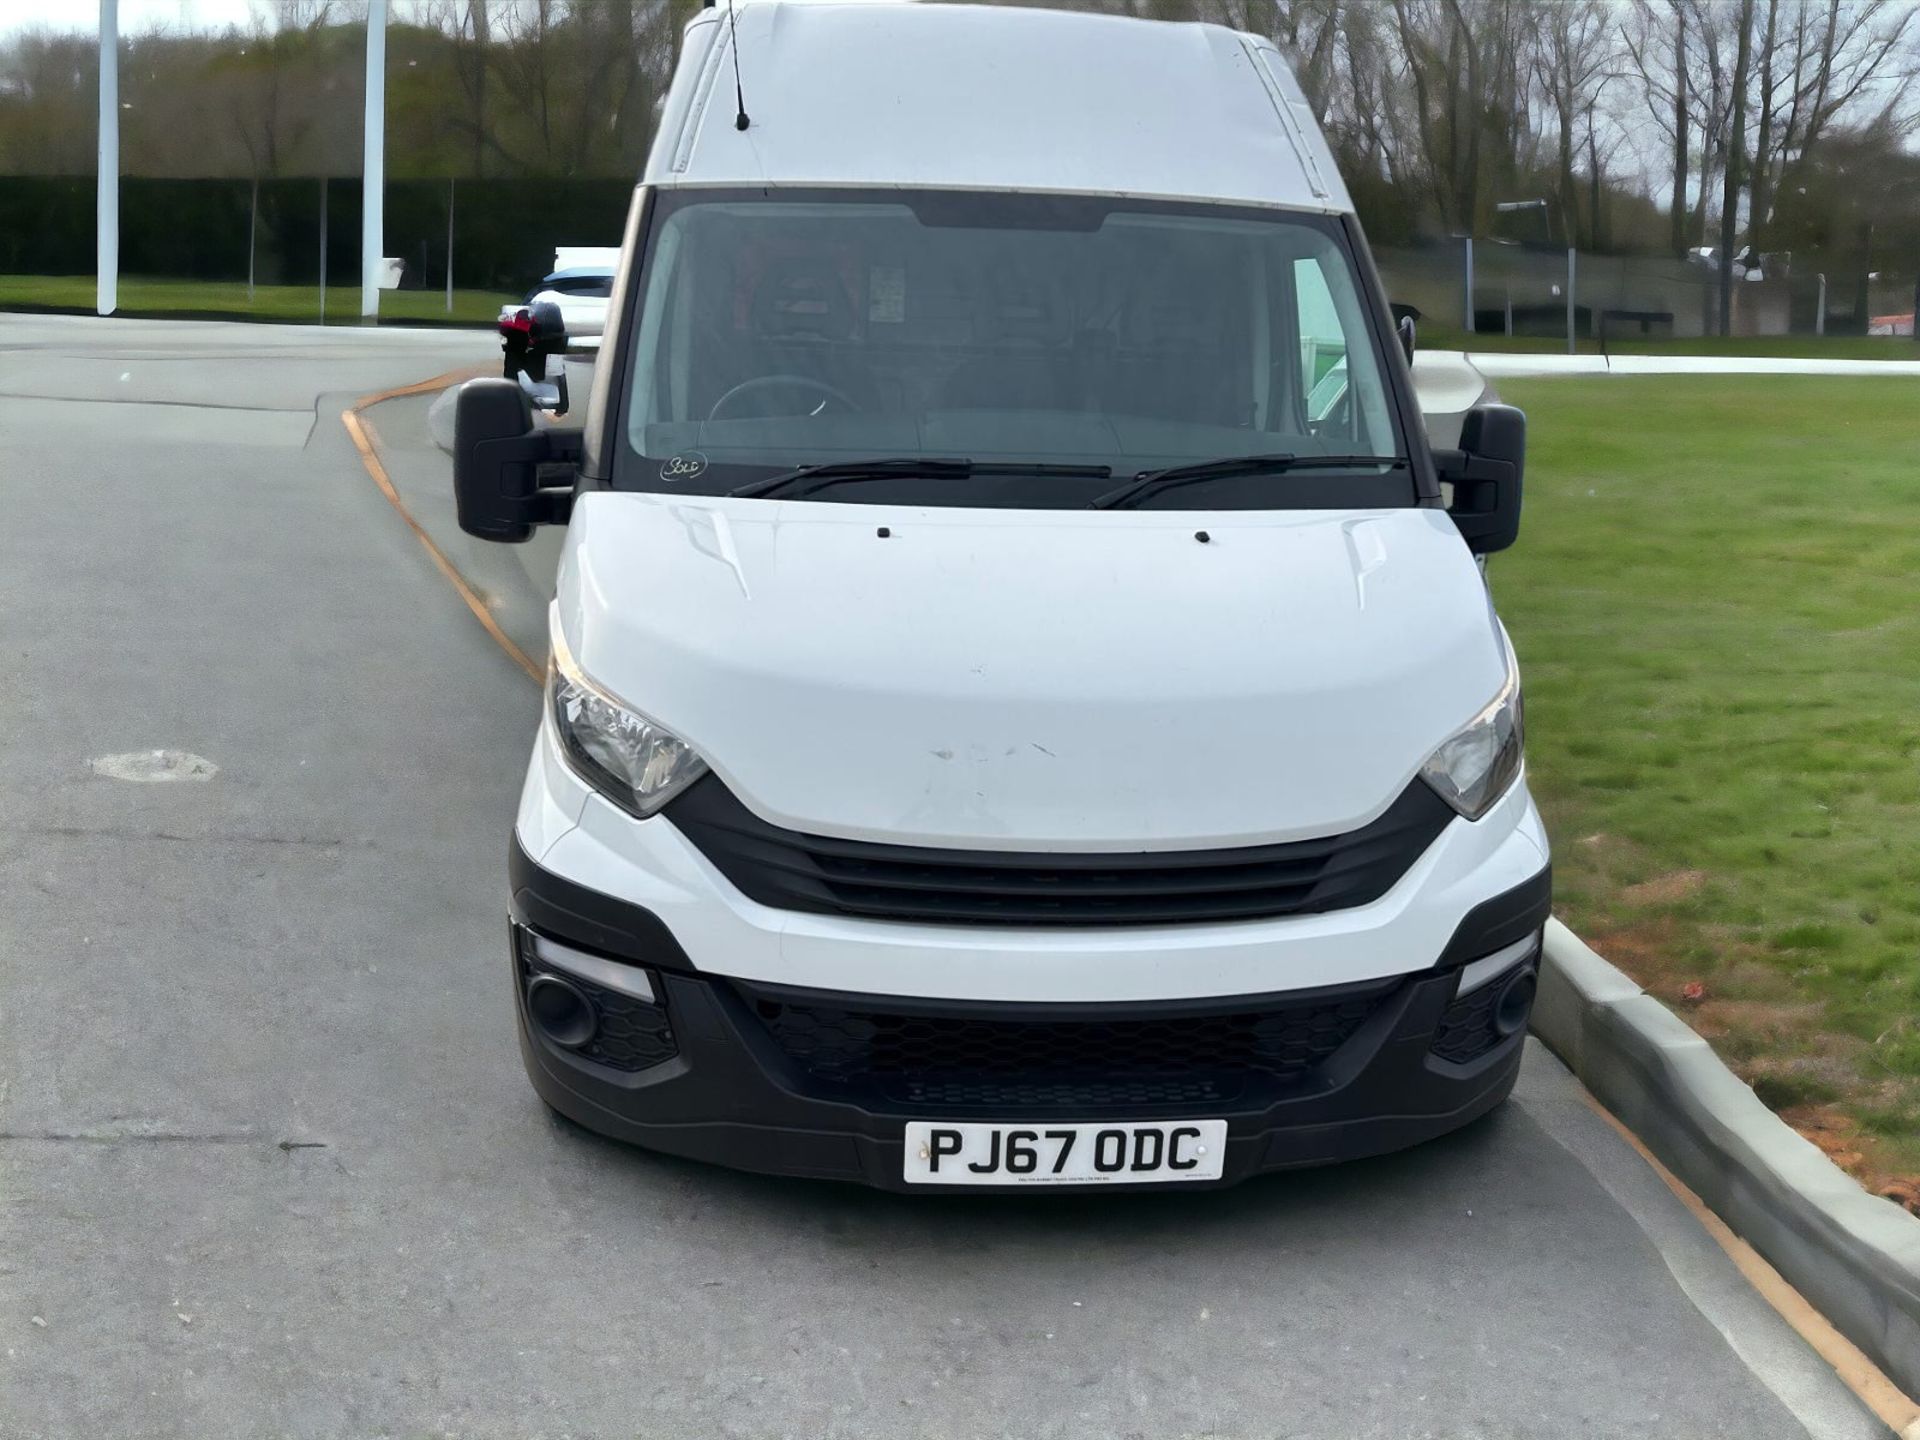 2017-67 REG IVECO DAILY 35S -HPI CLEAR - READY FOR WORK!